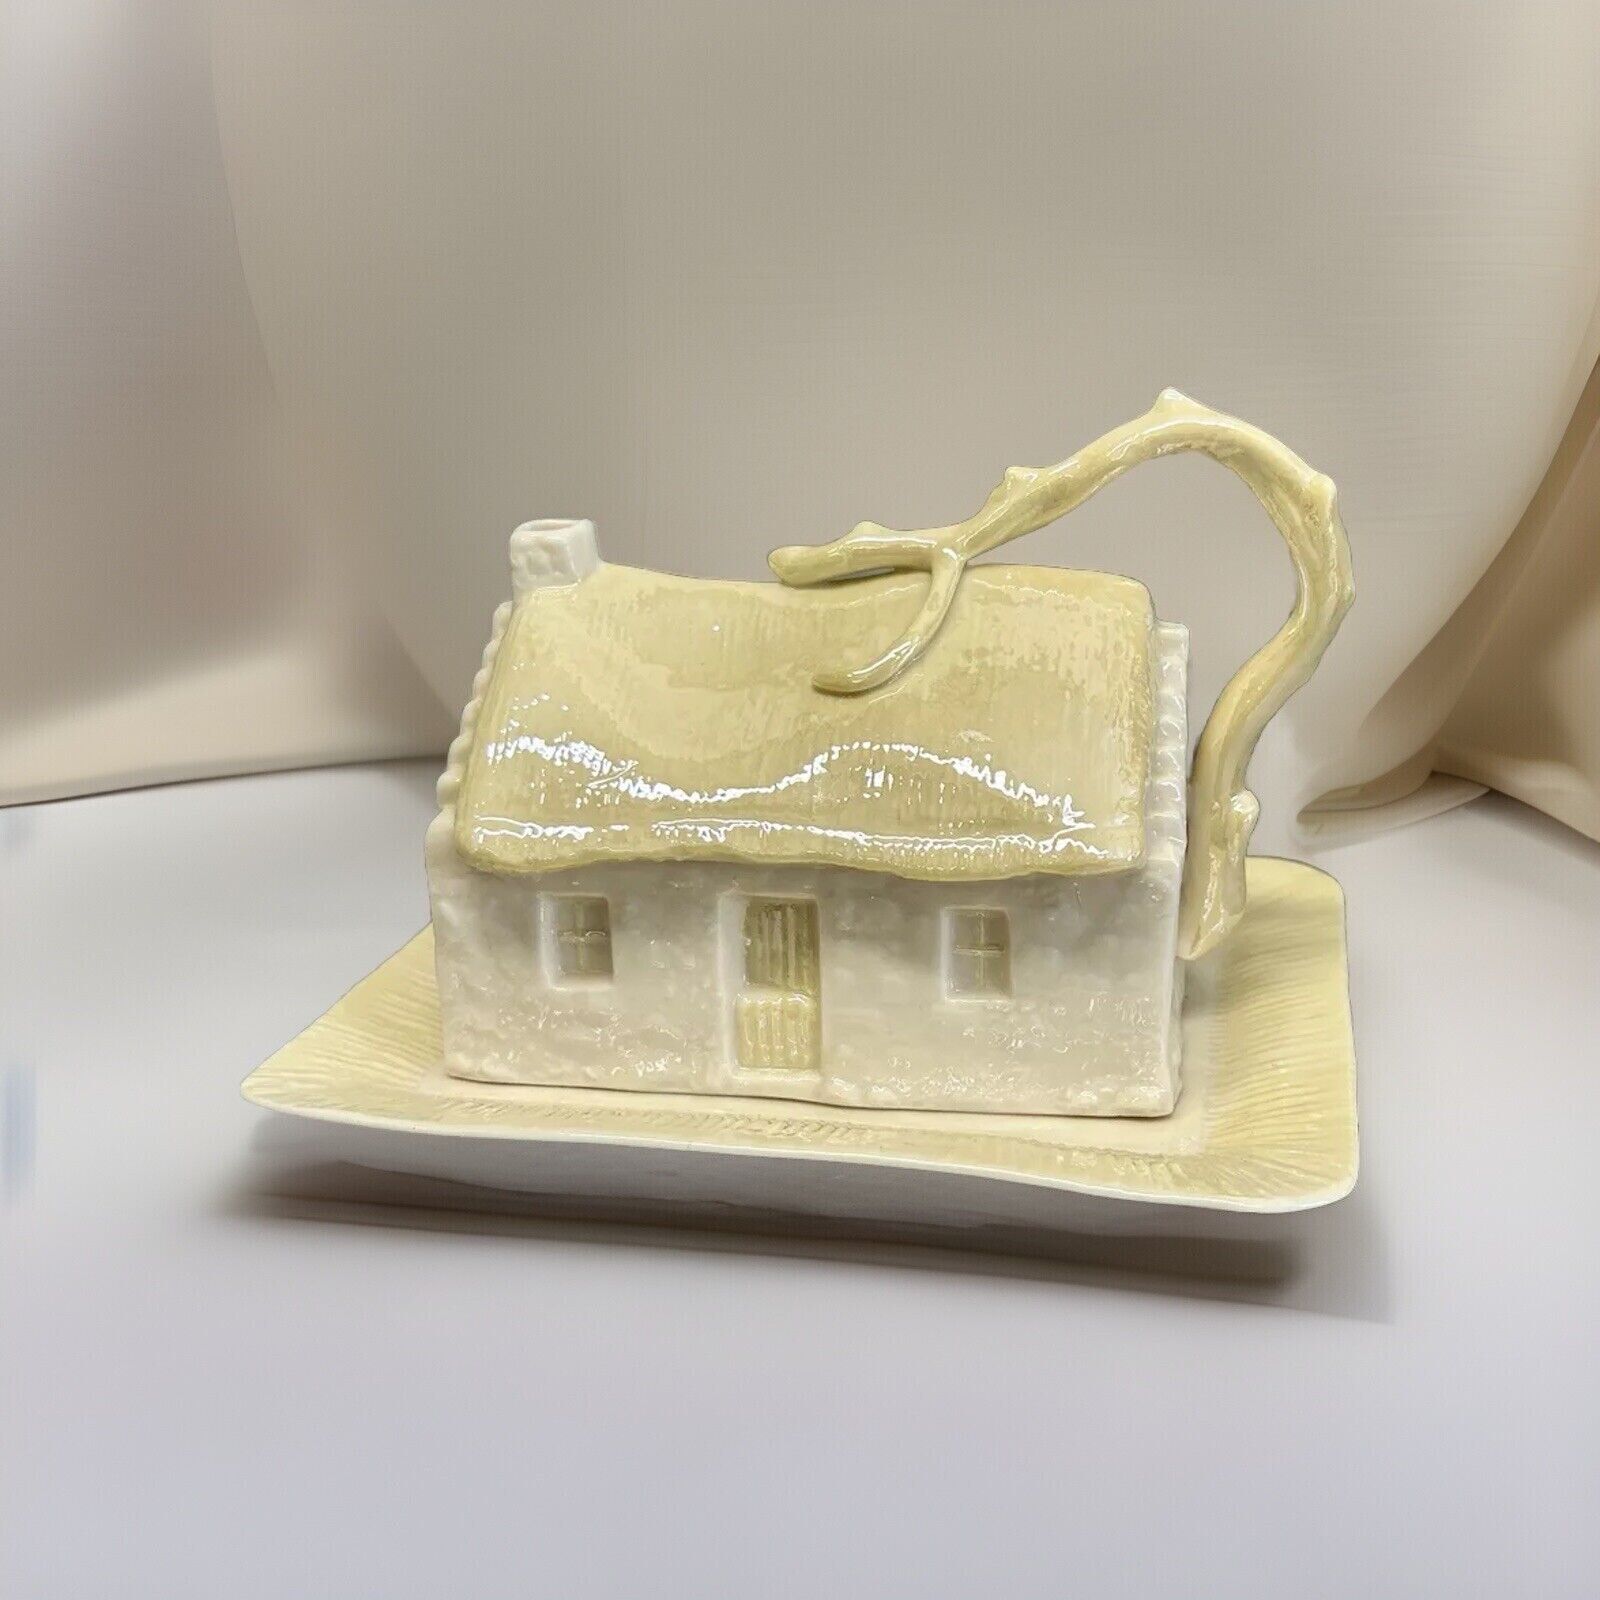 Vintage Belleek Ireland Butter Dish Country Cottage 5th Green Mark 1955-1965